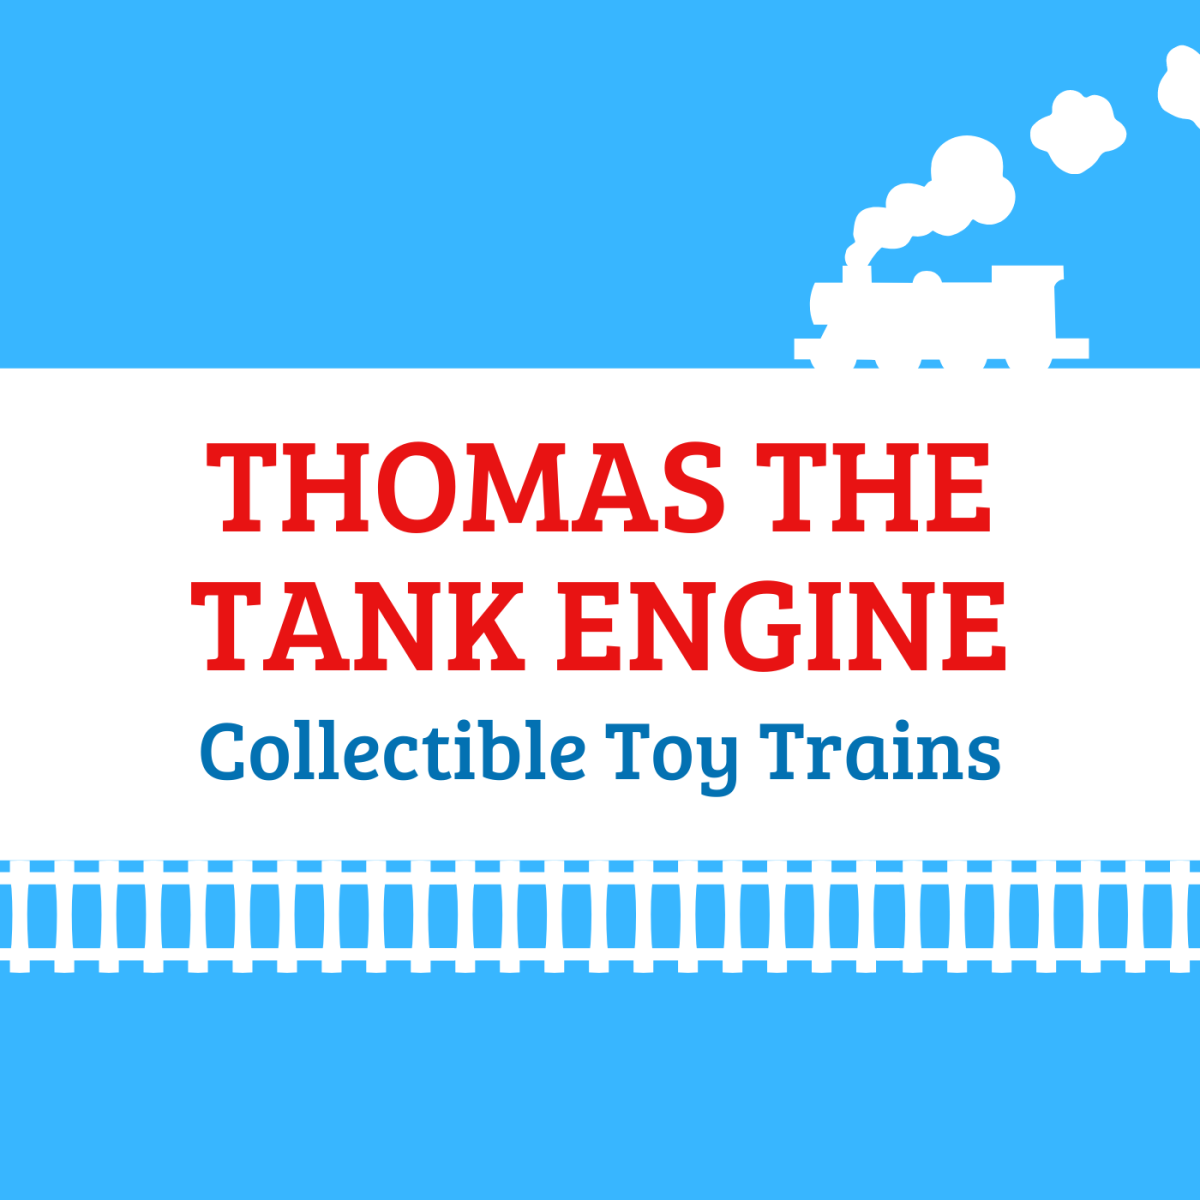 Thomas the Tank Engine Toy Trains: Guide for Collectors